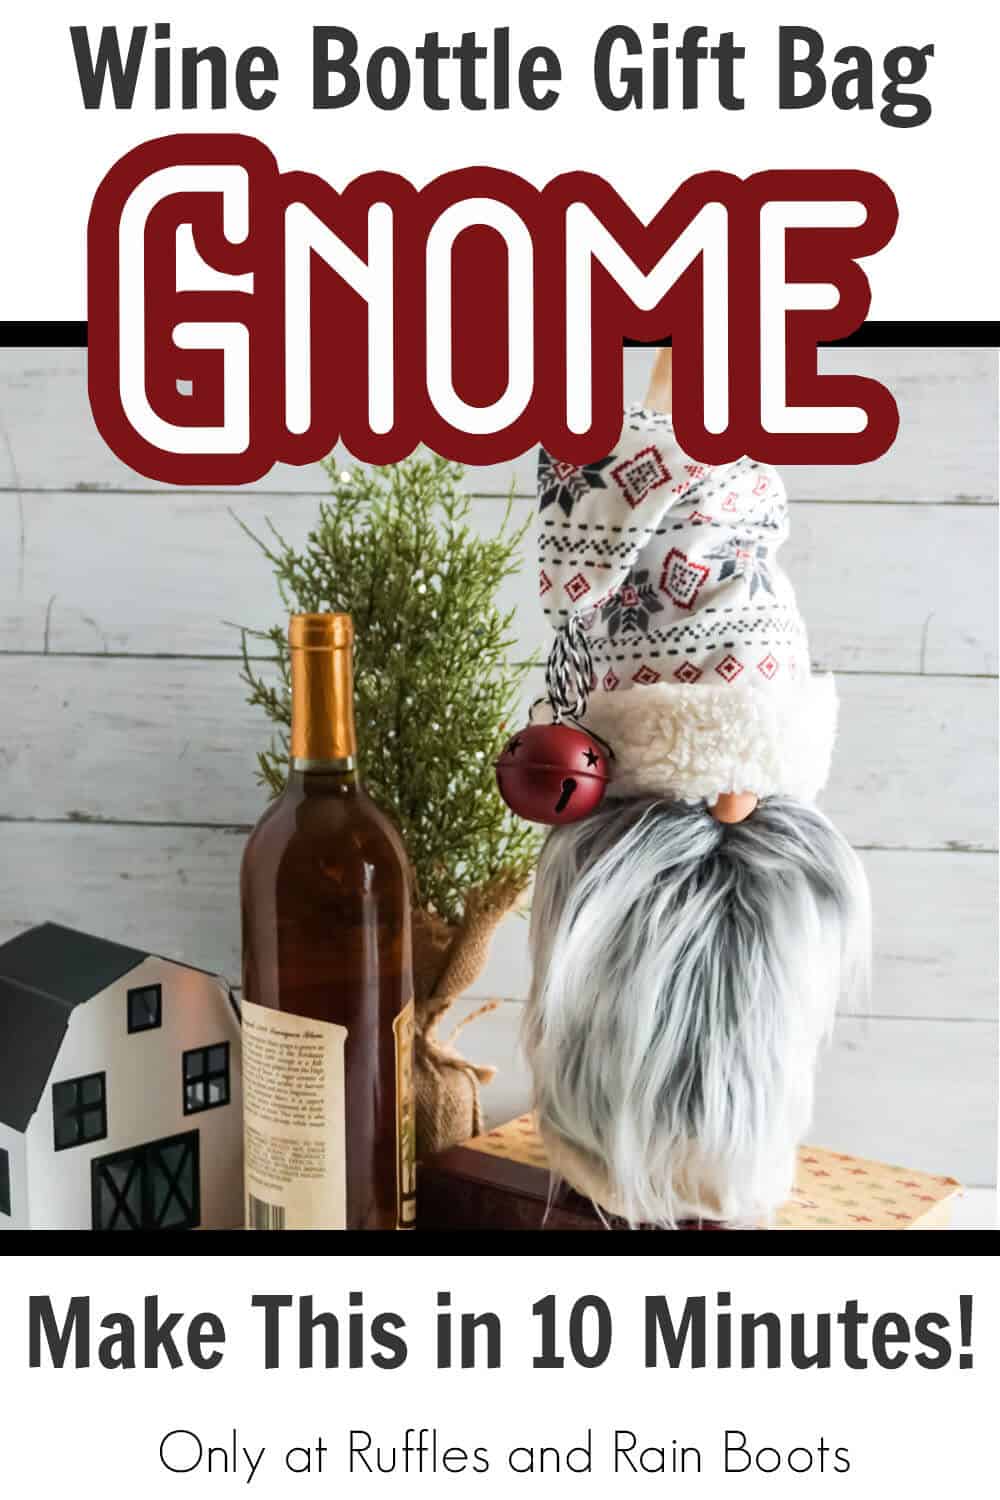 Scandinavian gnome wine bottle bag gnome craft with text which reads wine bottle gift bag gnome make this in 10 minutes.